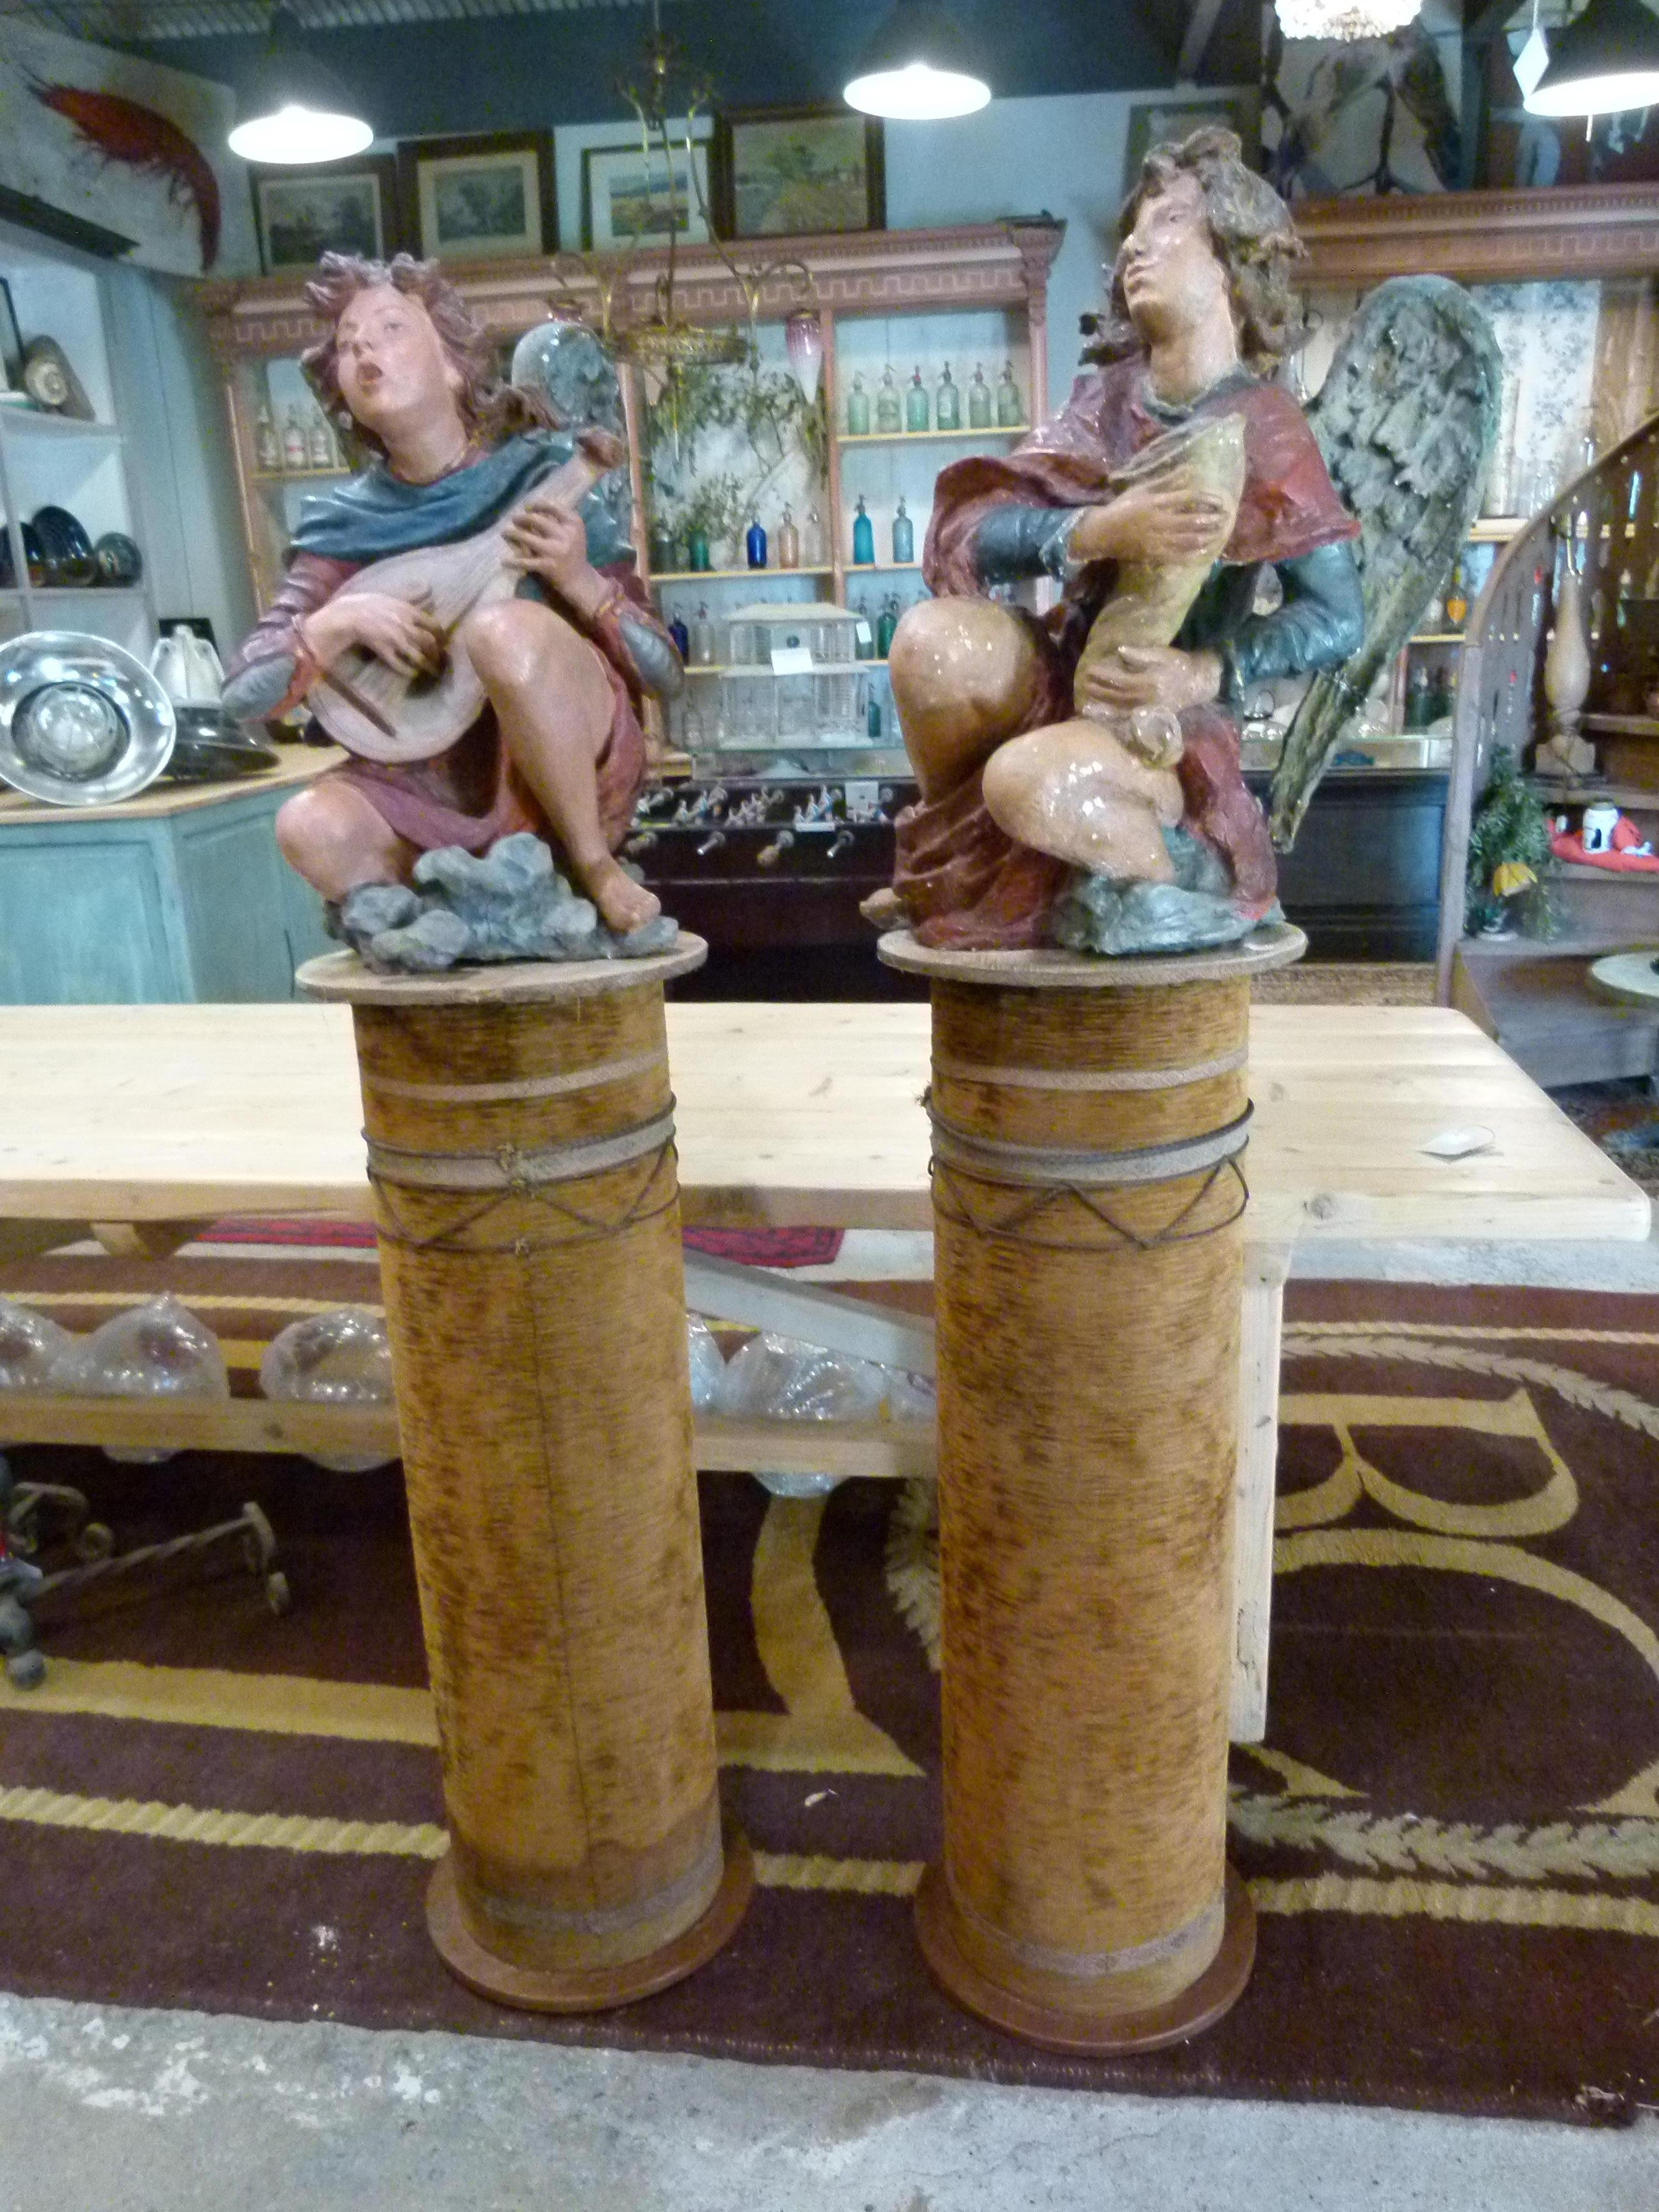 19th Century polychromed terracotta pair of Angels. The pedestals shown in the photos are not included.

Measurements:
Angels figure: 69 cm (23,6 in) height

One of the angel's wings is broken as you can appreciate in one of the photos.